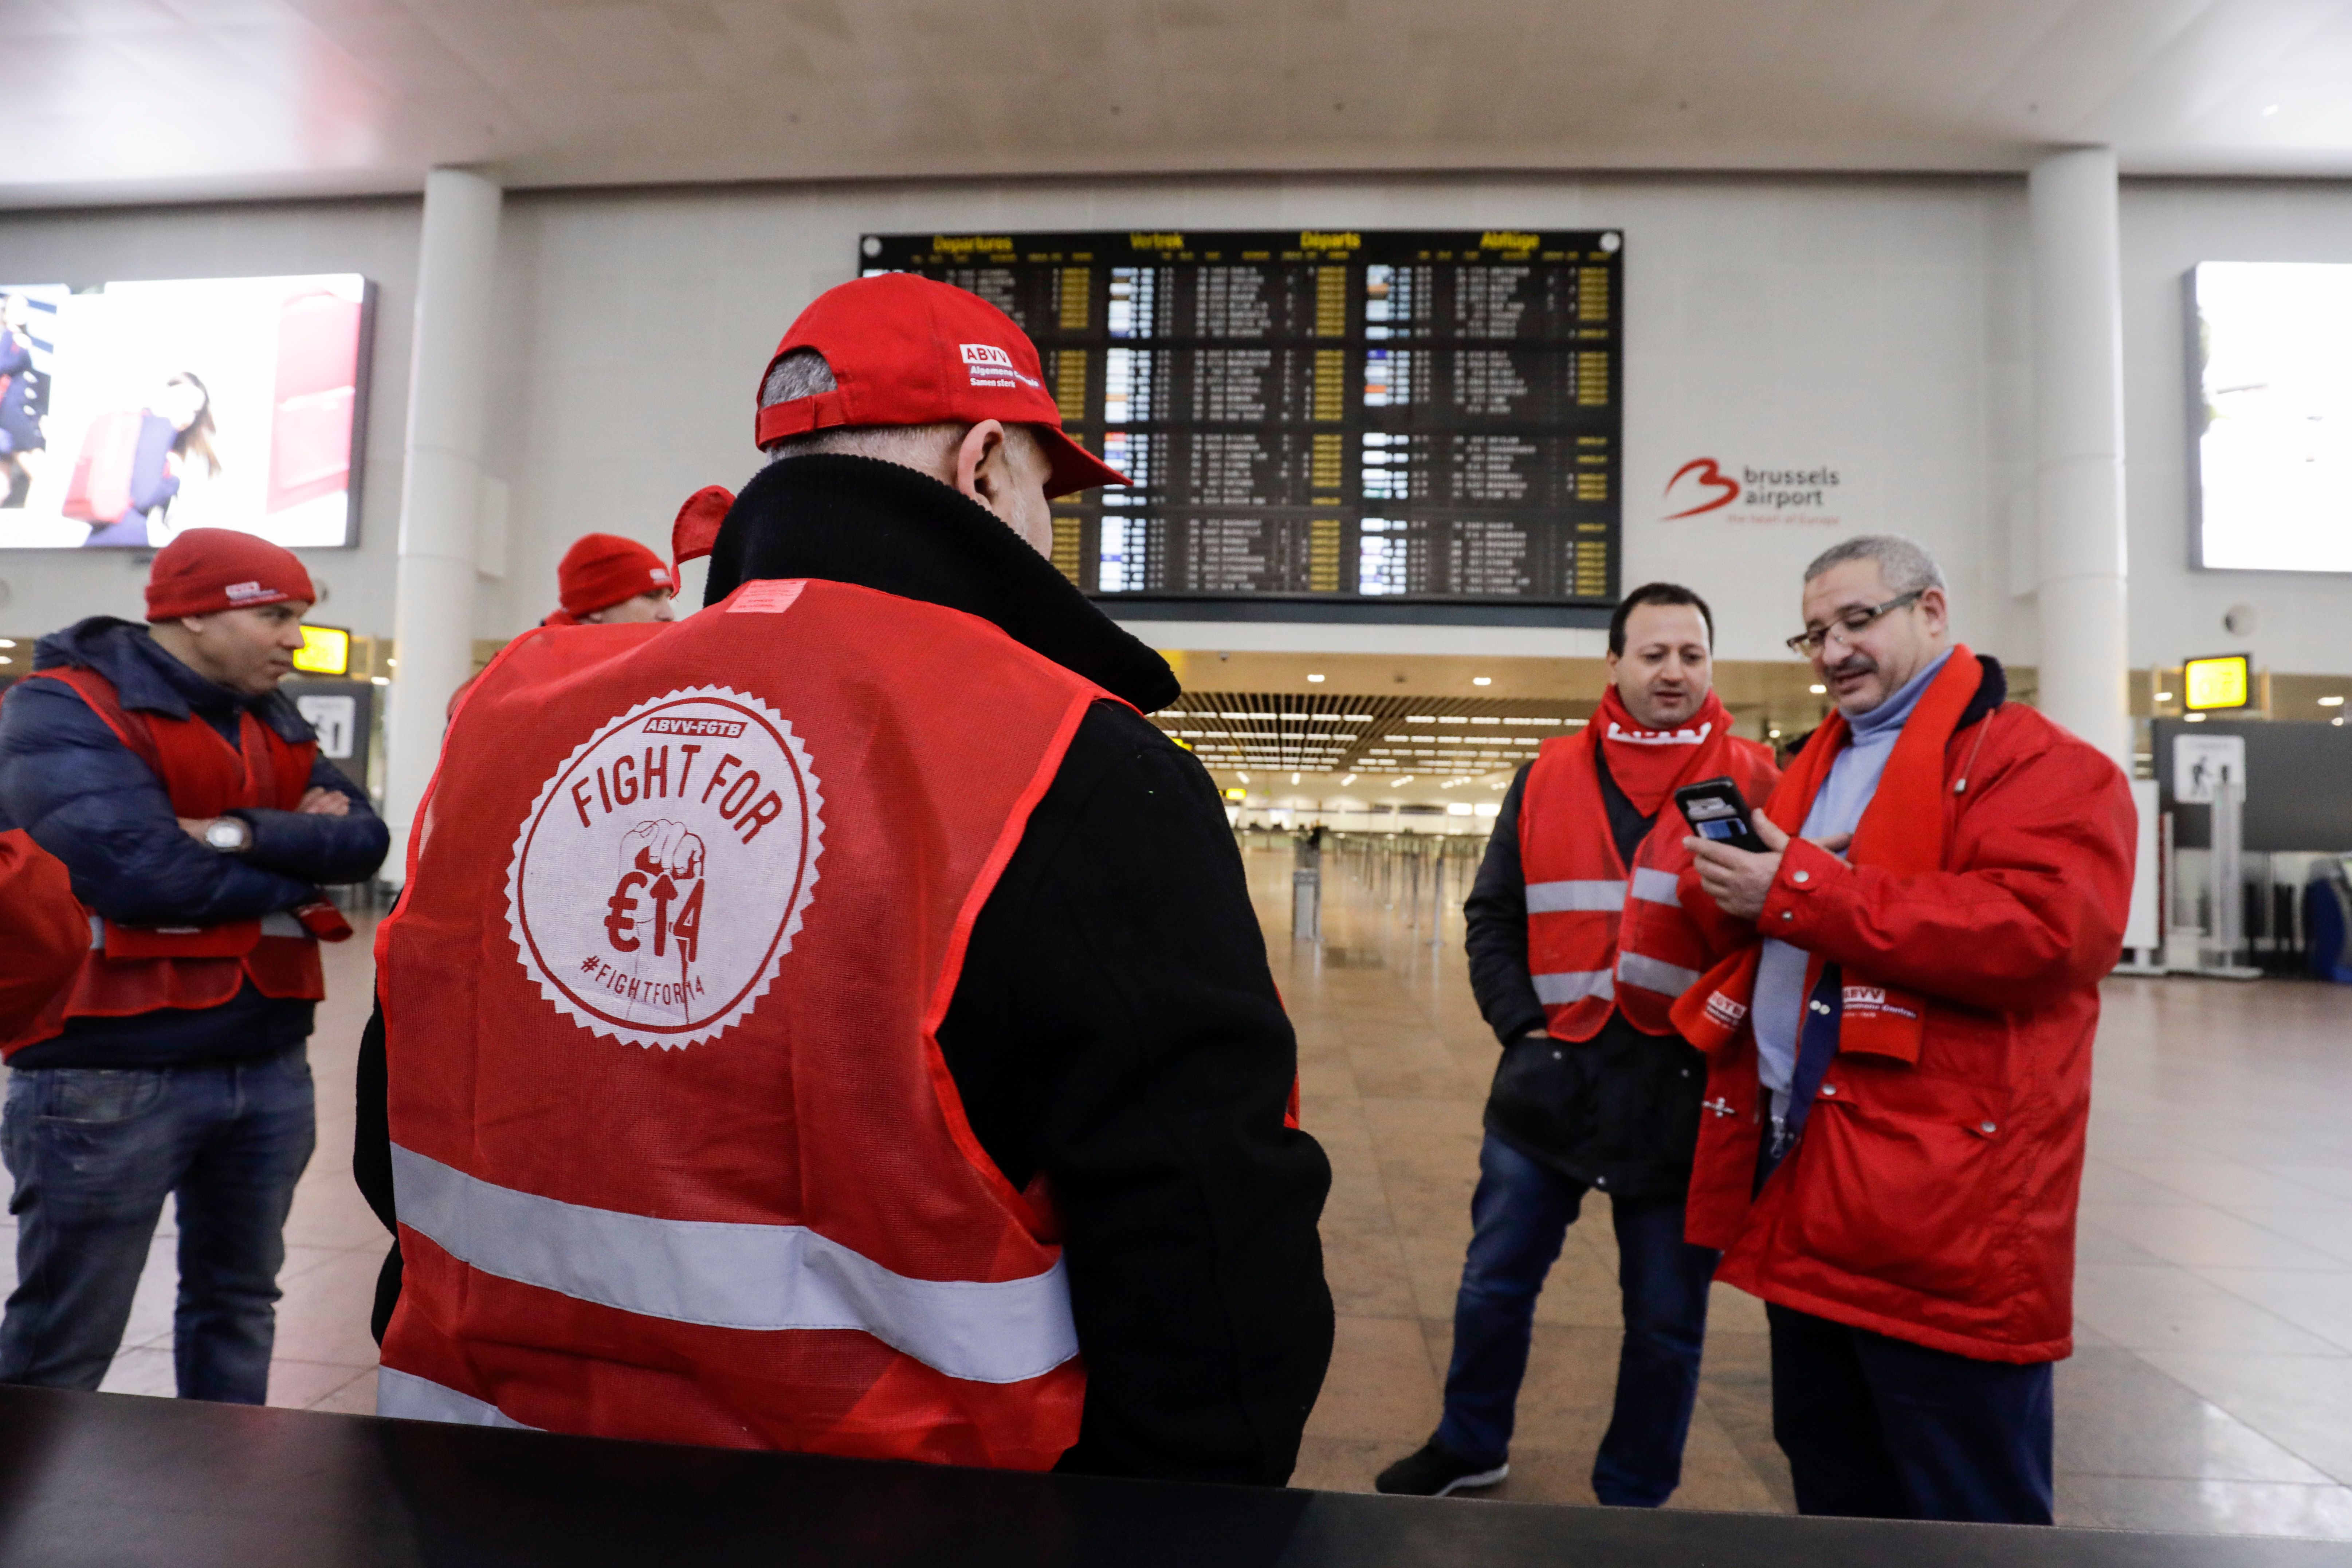 Union members stand at Brussels national airport in Zaventem, on the outskirts of the Belgium capital, on February 13, 2019, during a national general strike. (THIERRY ROGE / BELGA / AFP) / Belgium OUT (Photo credit should read THIERRY ROGE/AFP/Getty Images)